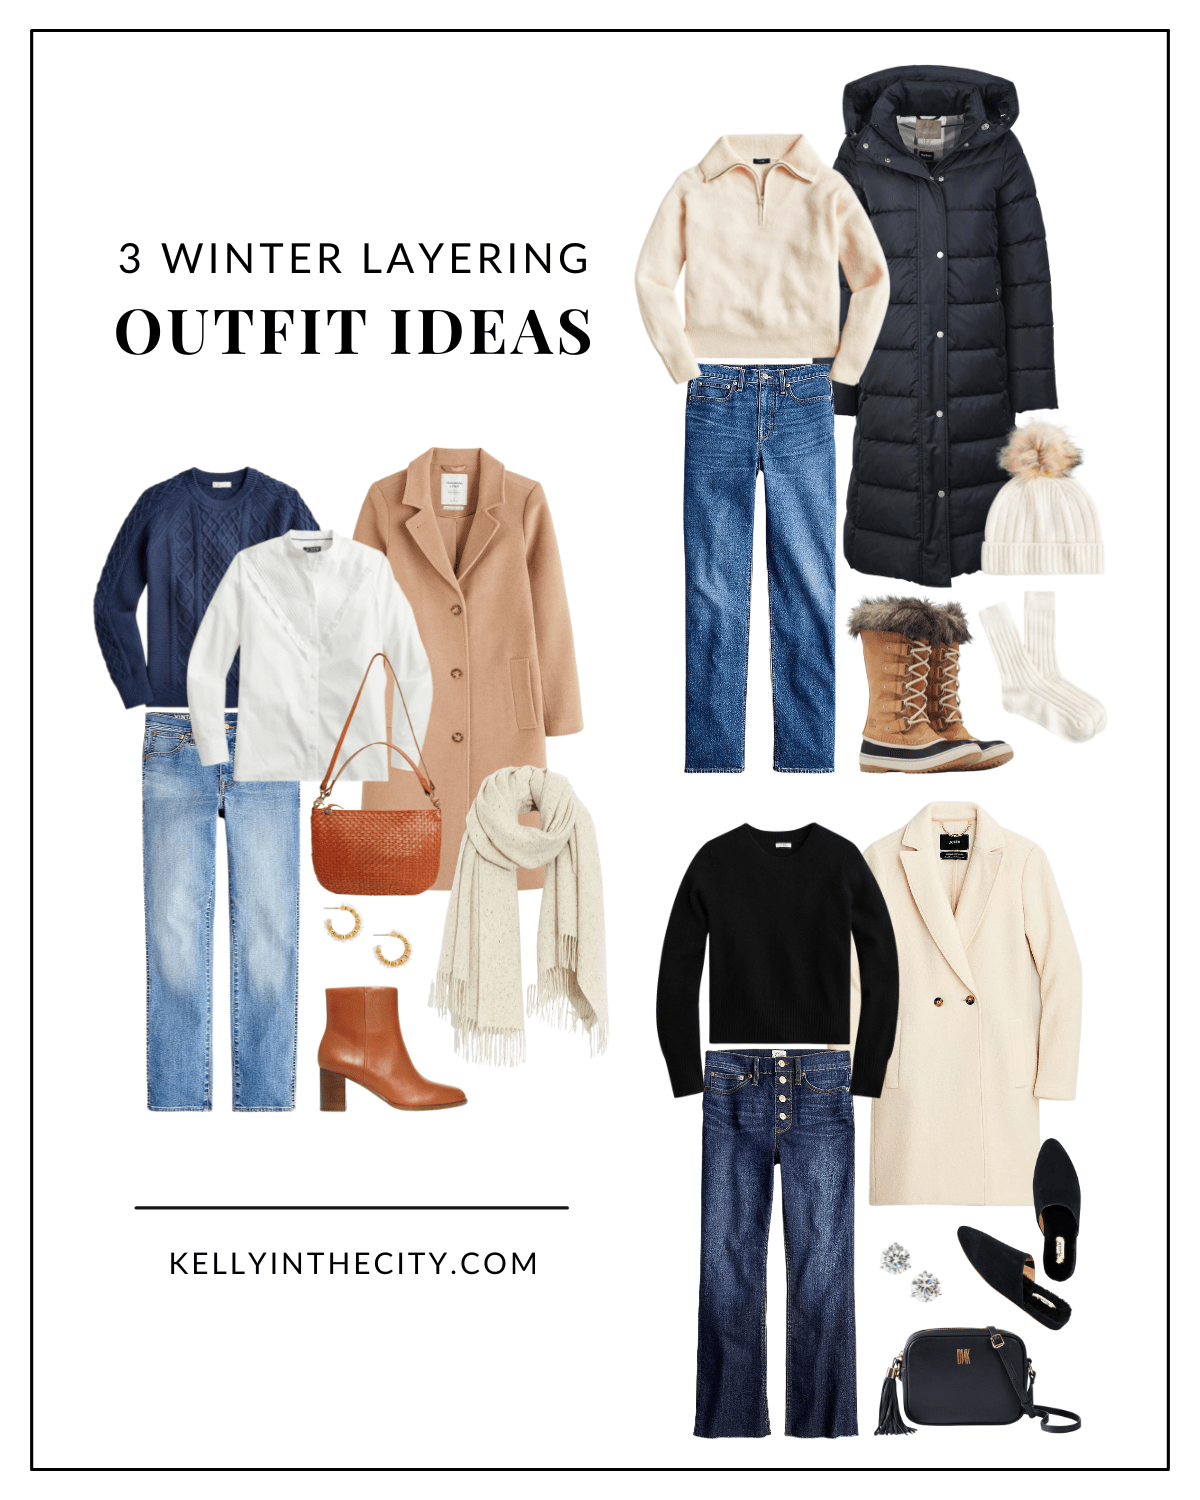 How to Wear Layers During Fall and Winter + 16 Outfit Ideas